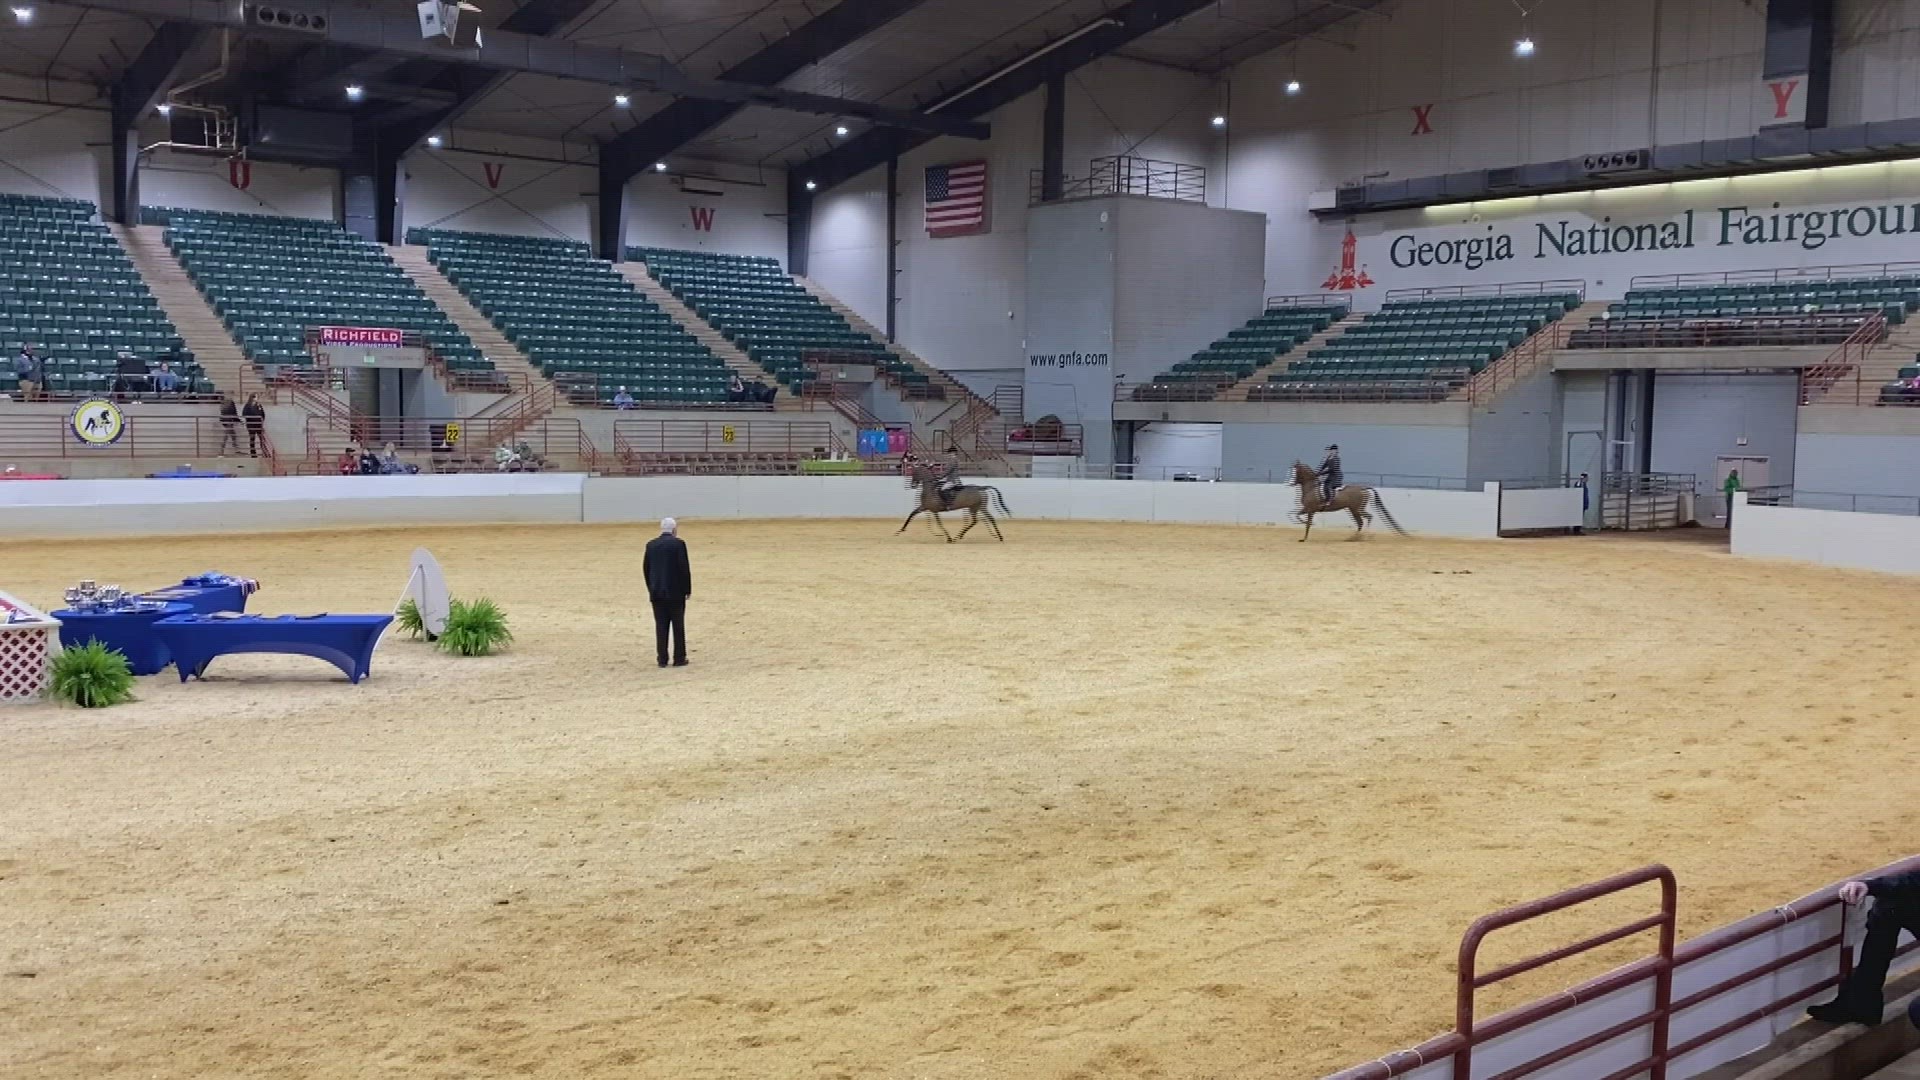 The Pro-Am Benefit Classic Horse Show of Georgia has been one of the top Equestrian events in the Southeast for over 40 years.